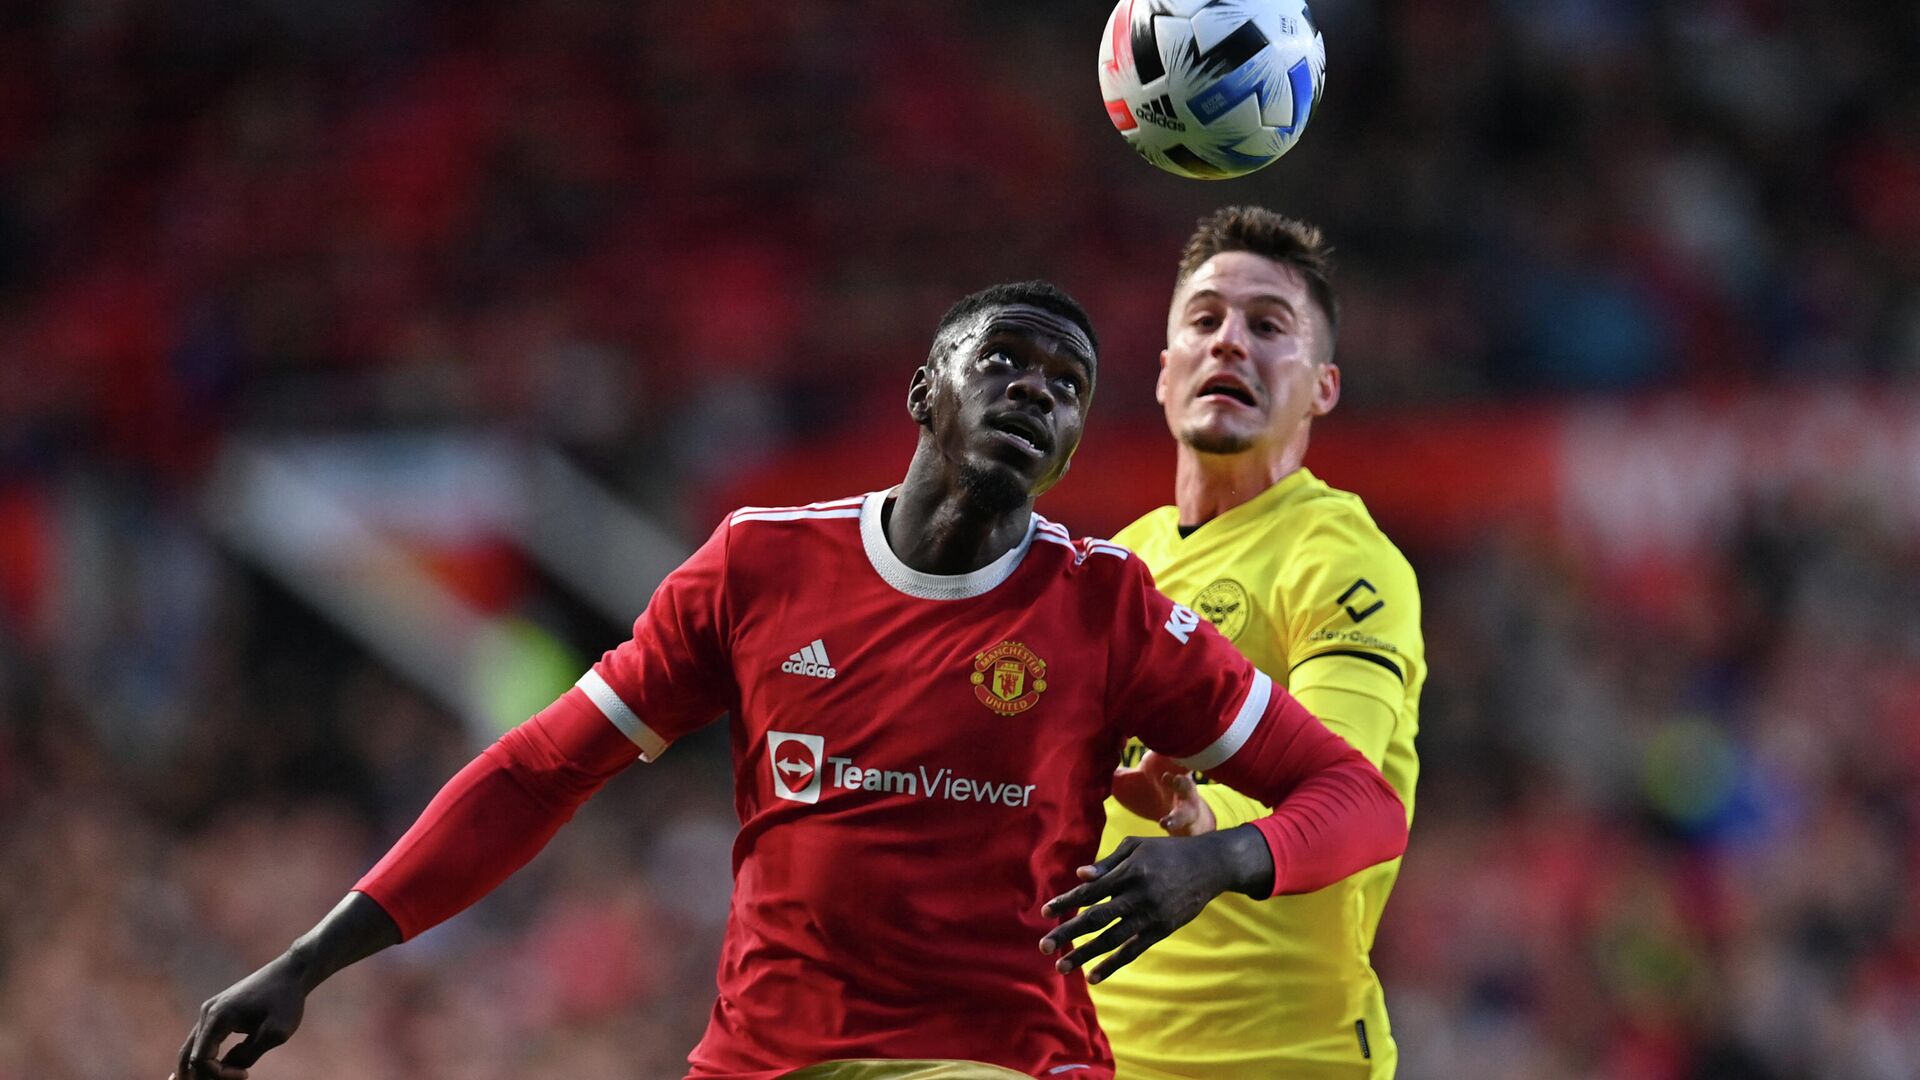 Manchester United's Congo-born English defender Axel Tuanzebe (L) vies with Brentford's Spanish striker Sergi Canos during the English Premier League friendly football match between Manchester United and Brentford at Old Trafford in Manchester, north west England, on July 28, 2021. (Photo by Paul ELLIS / AFP) / RESTRICTED TO EDITORIAL USE. No use with unauthorized audio, video, data, fixture lists, club/league logos or 'live' services. Online in-match use limited to 120 images. An additional 40 images may be used in extra time. No video emulation. Social media in-match use limited to 120 images. An additional 40 images may be used in extra time. No use in betting publications, games or single club/league/player publications. /  - РИА Новости, 1920, 08.01.2022